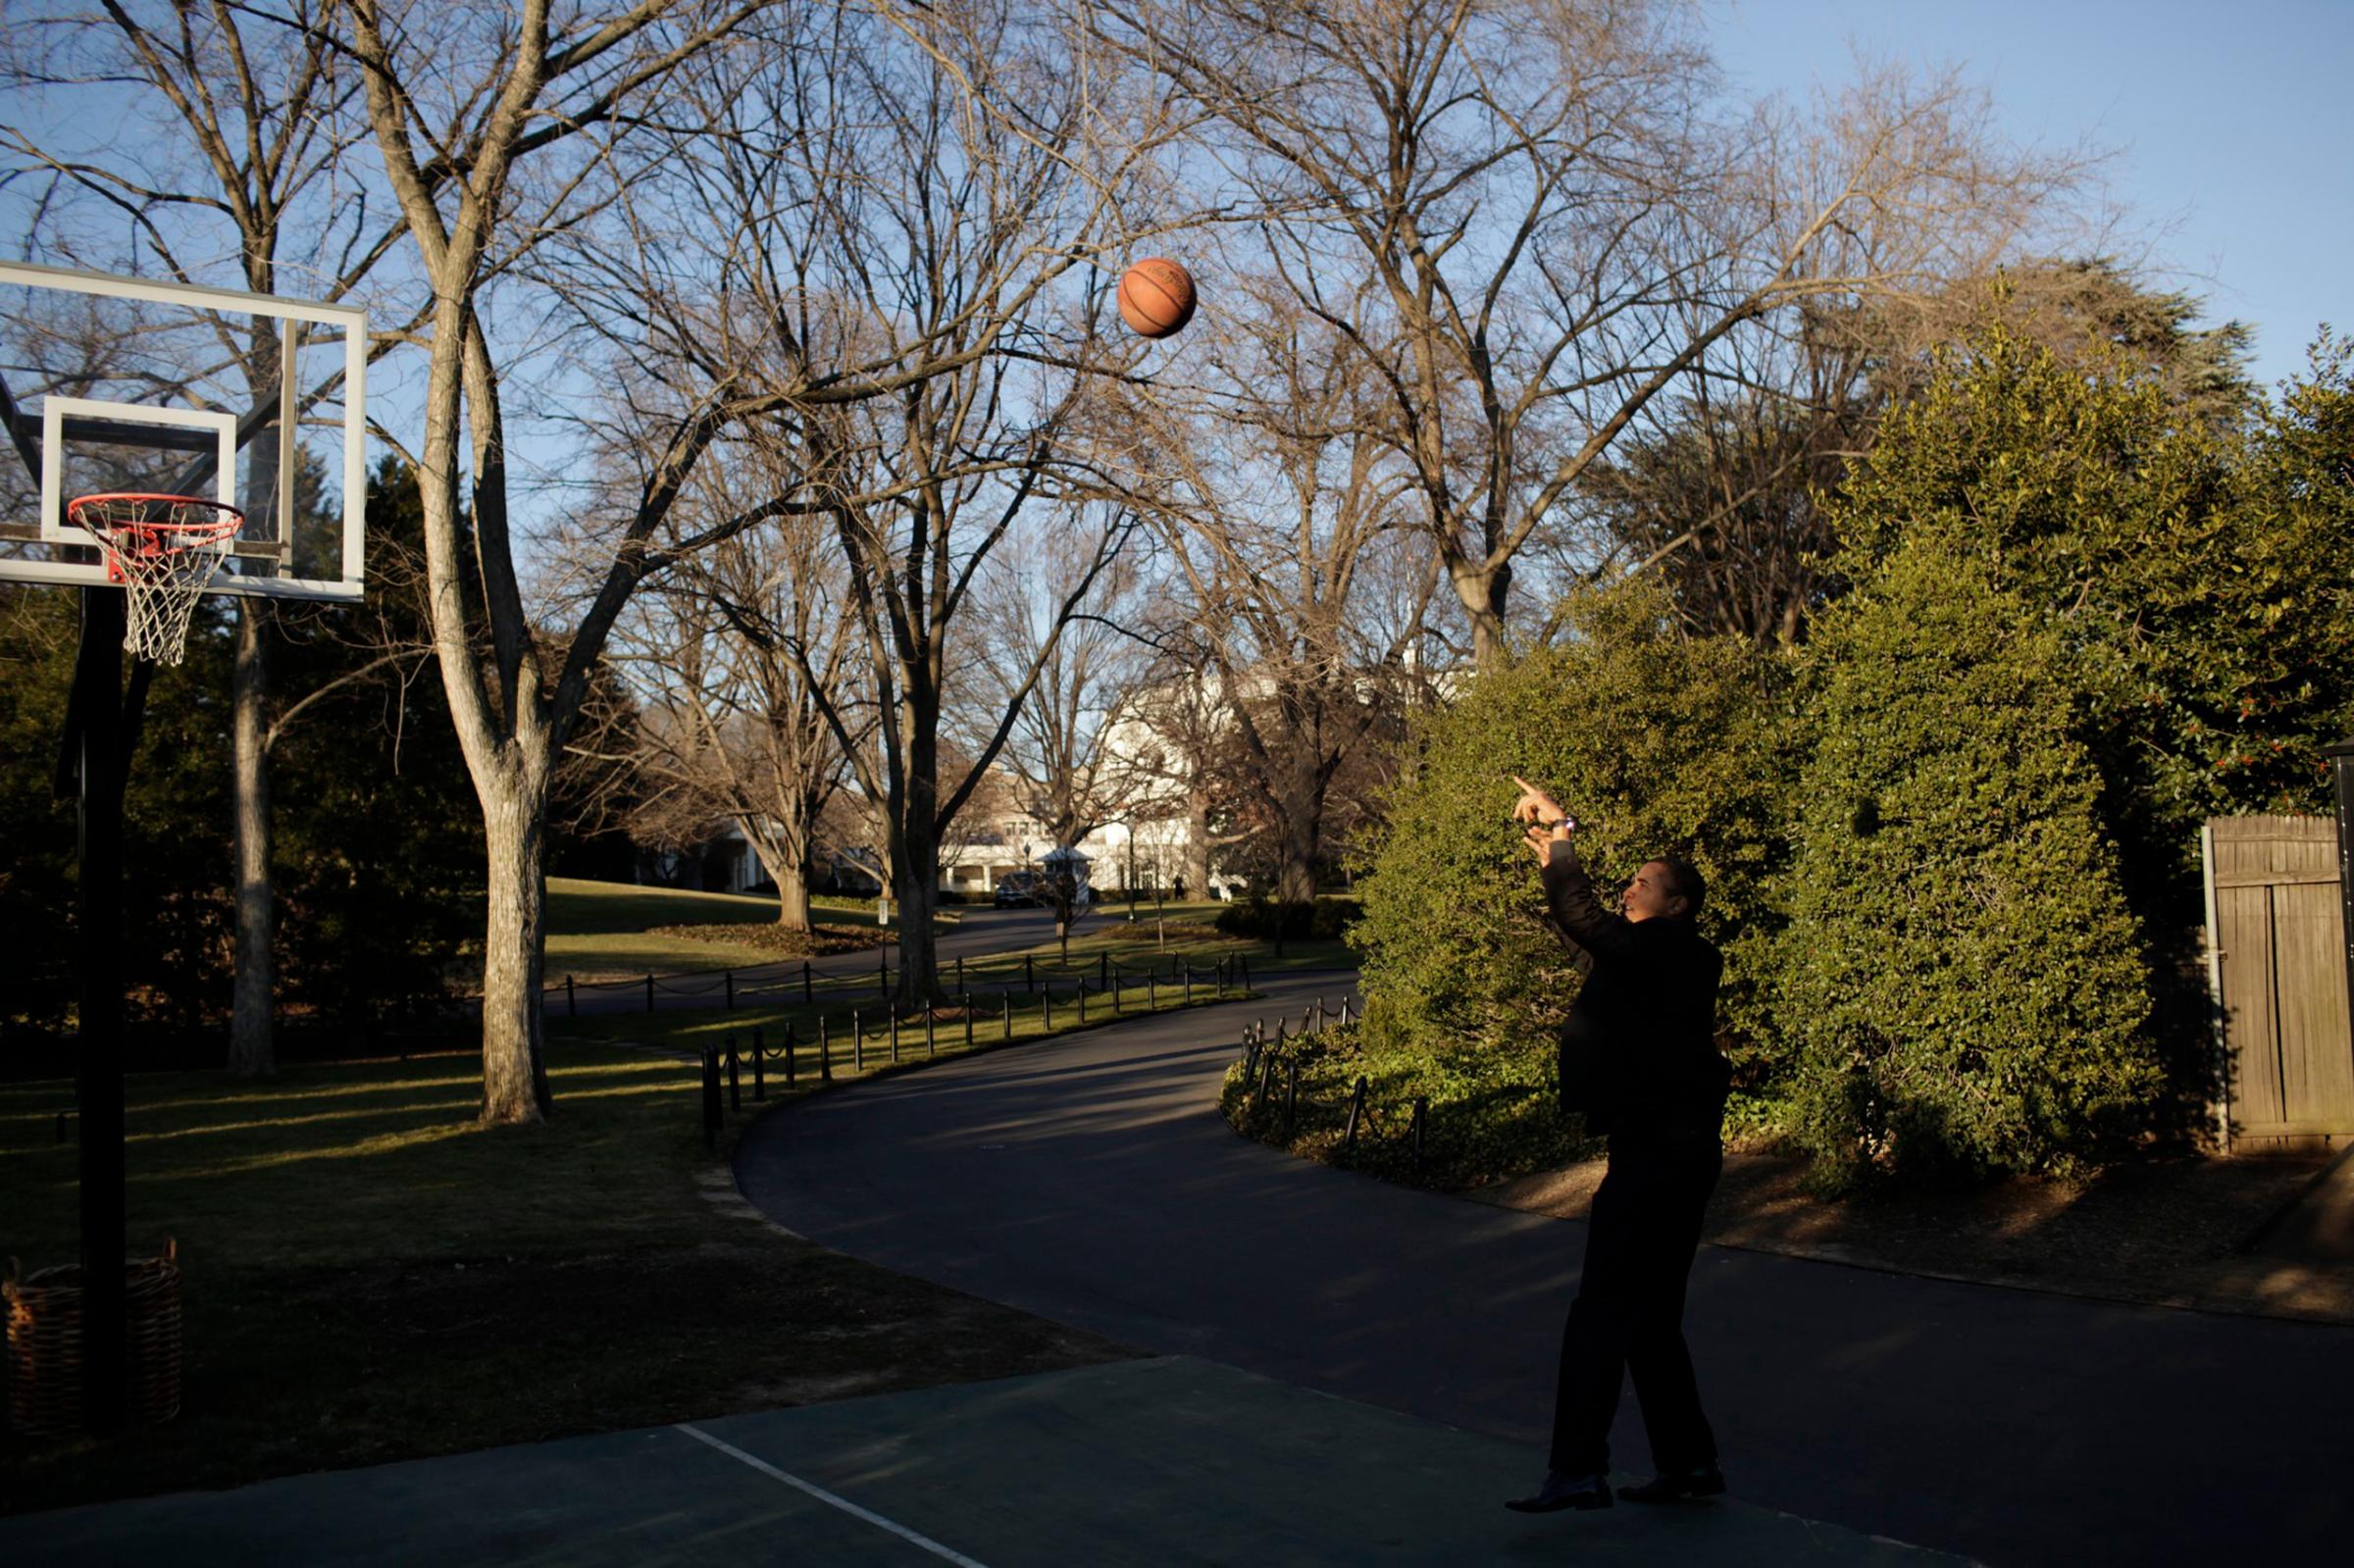 President Barack Obama shpts a basketball during a historical tour of the White House on Jan 24, 2009.